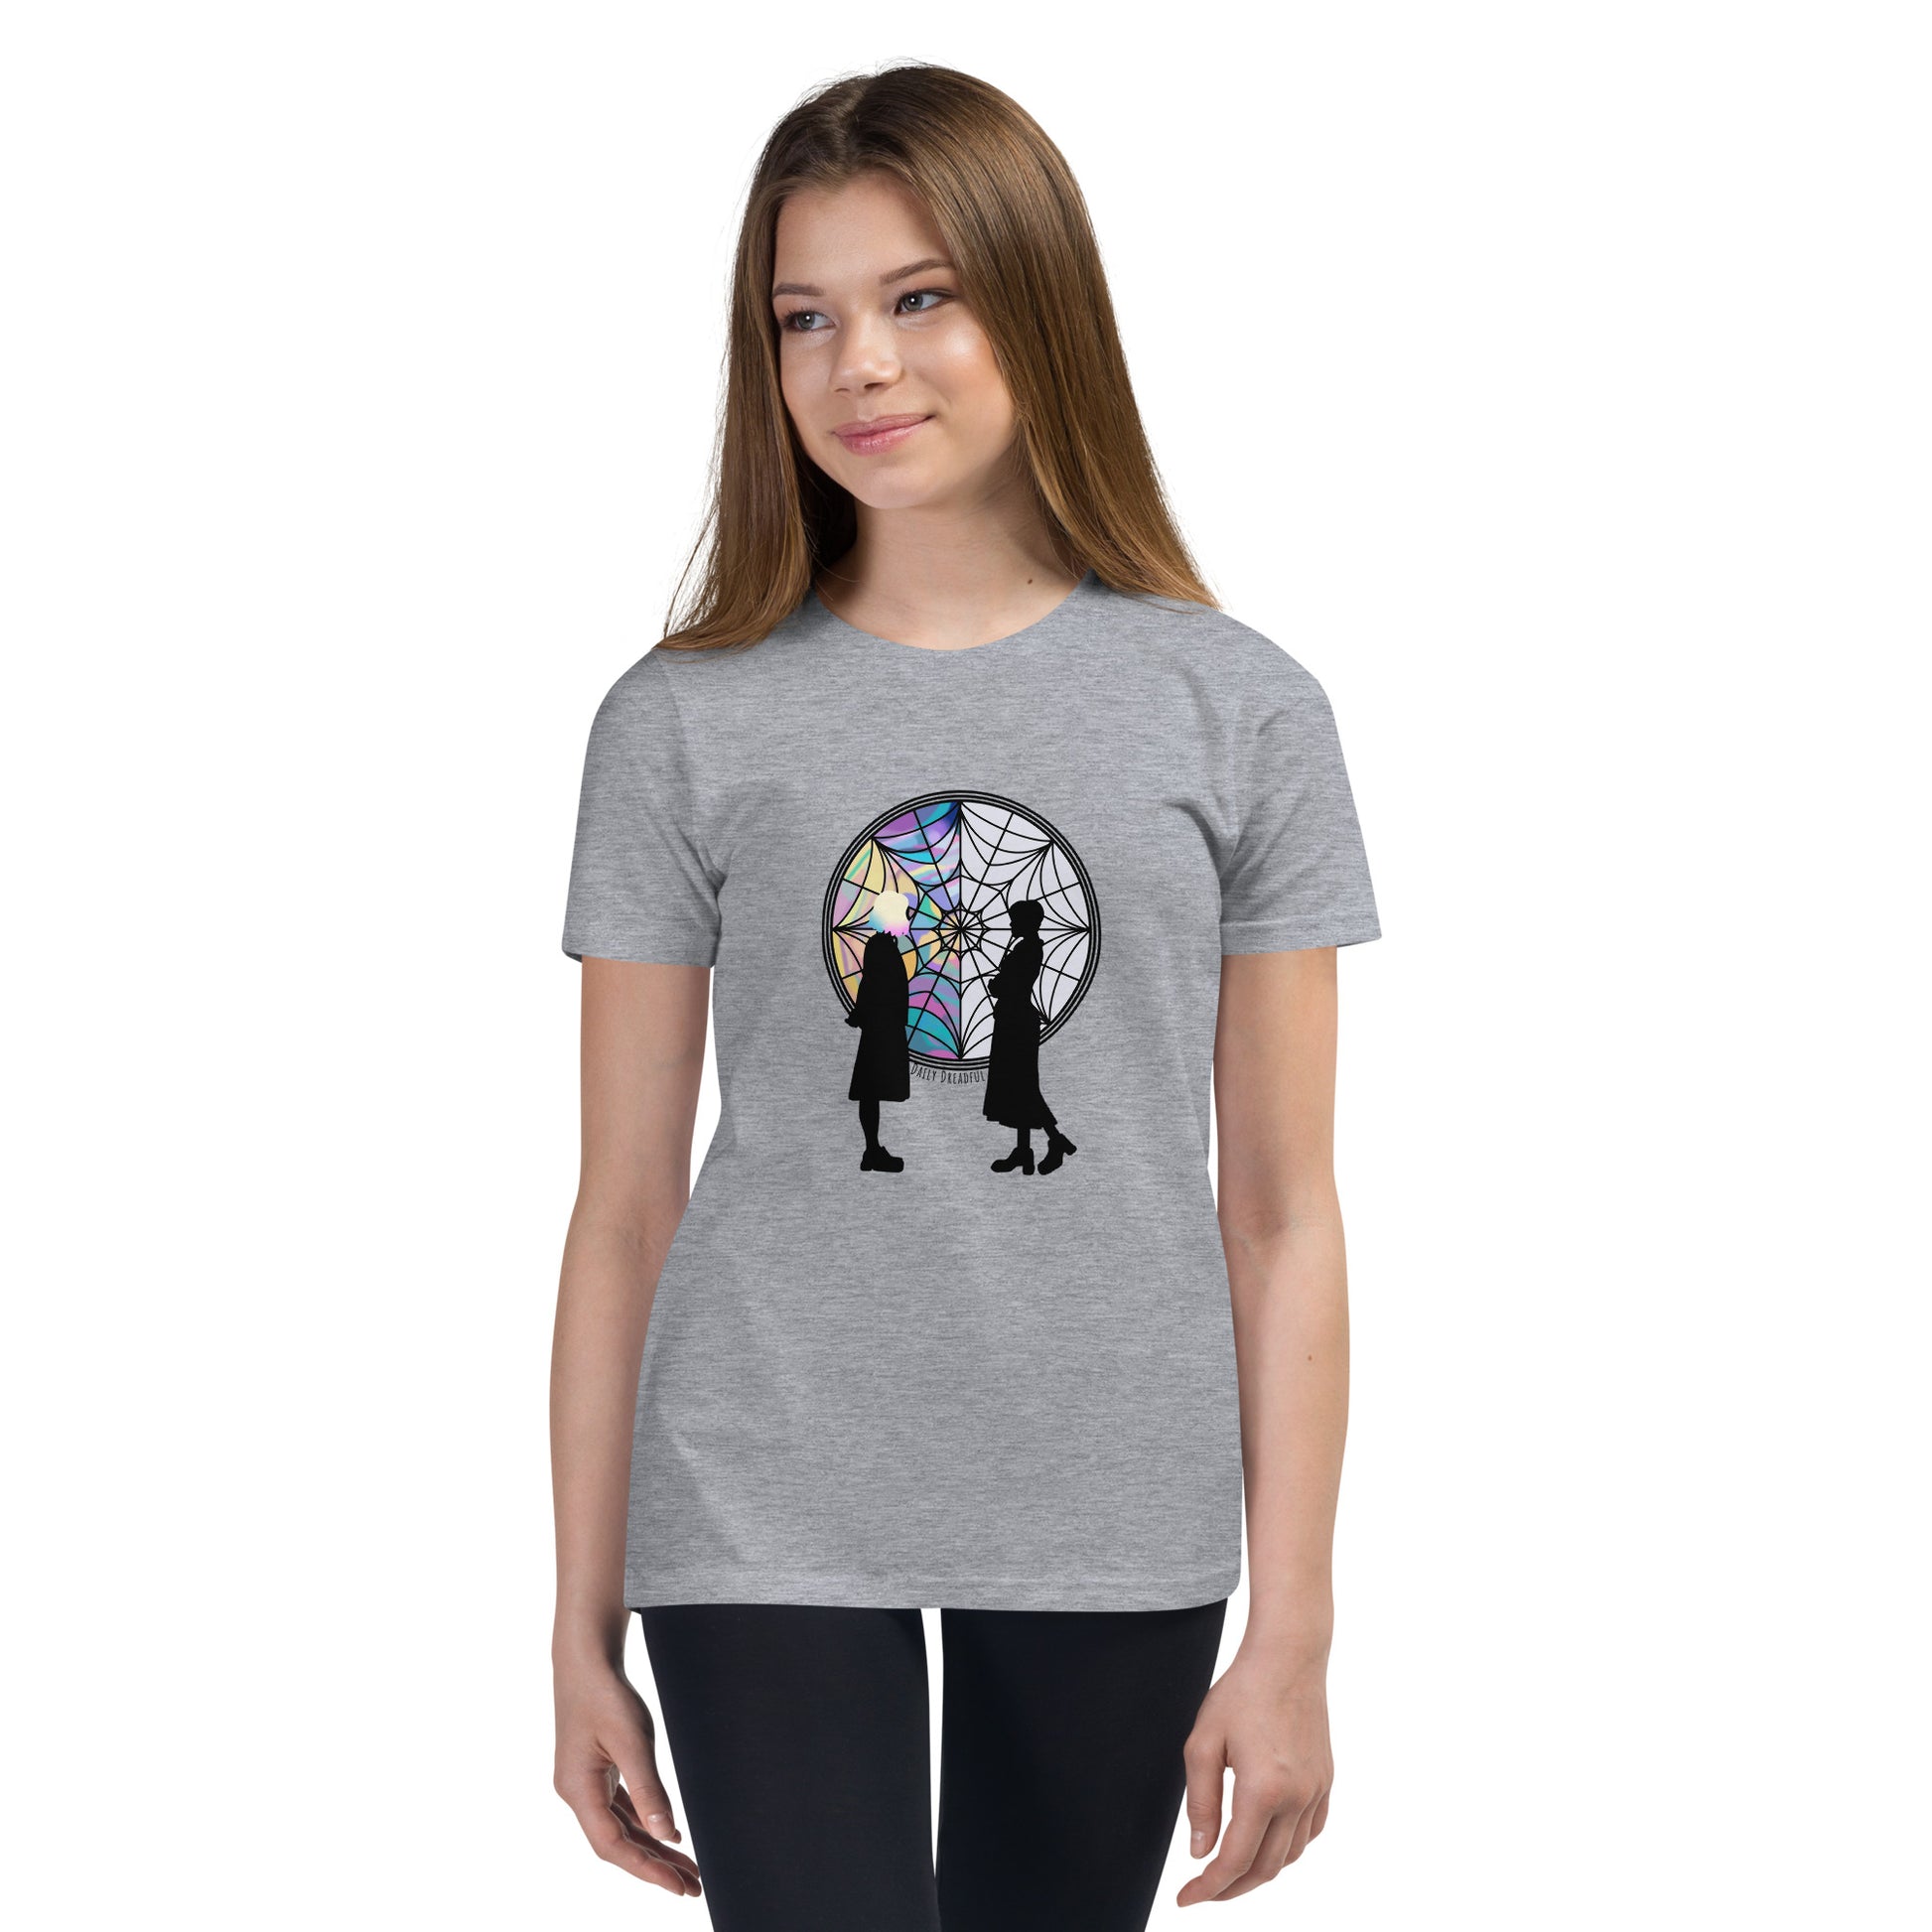 athletic heather "Wednesday Addams and Enid" Youth Short Sleeve T-Shirt from Daily Dreadful